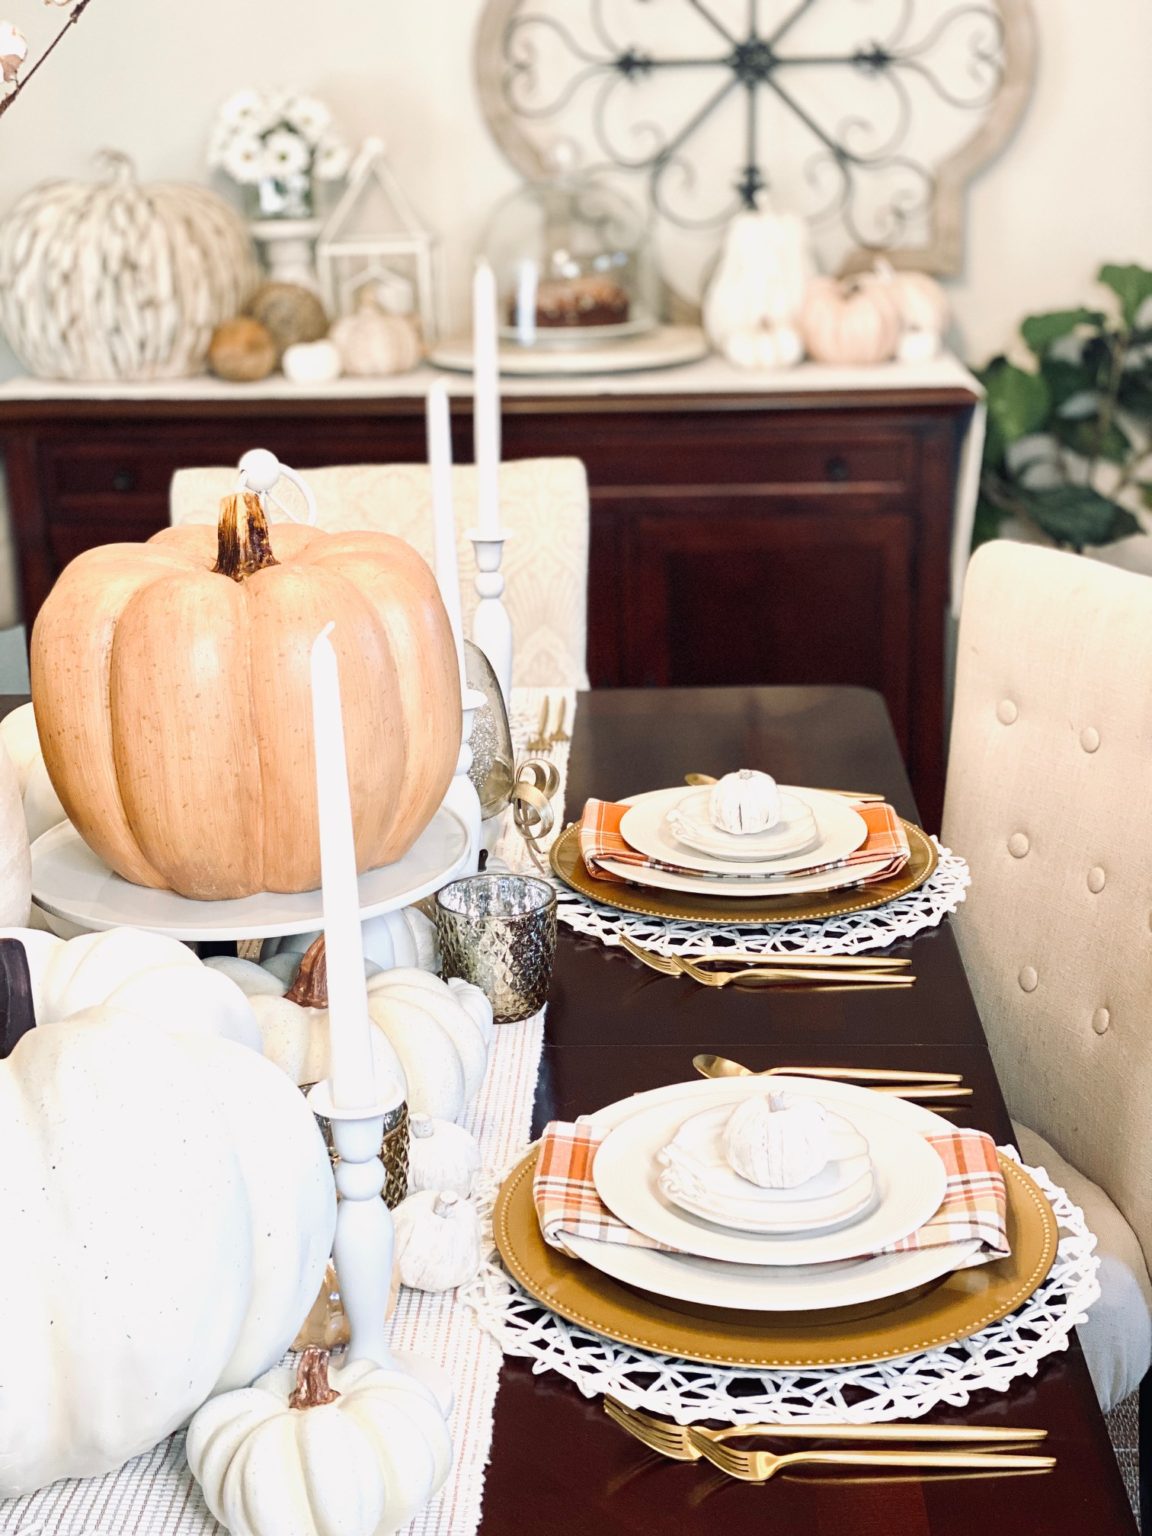 5 TIPS FOR DECORATING A THANKSGIVING TABLE - A Midlife Style, Home ...